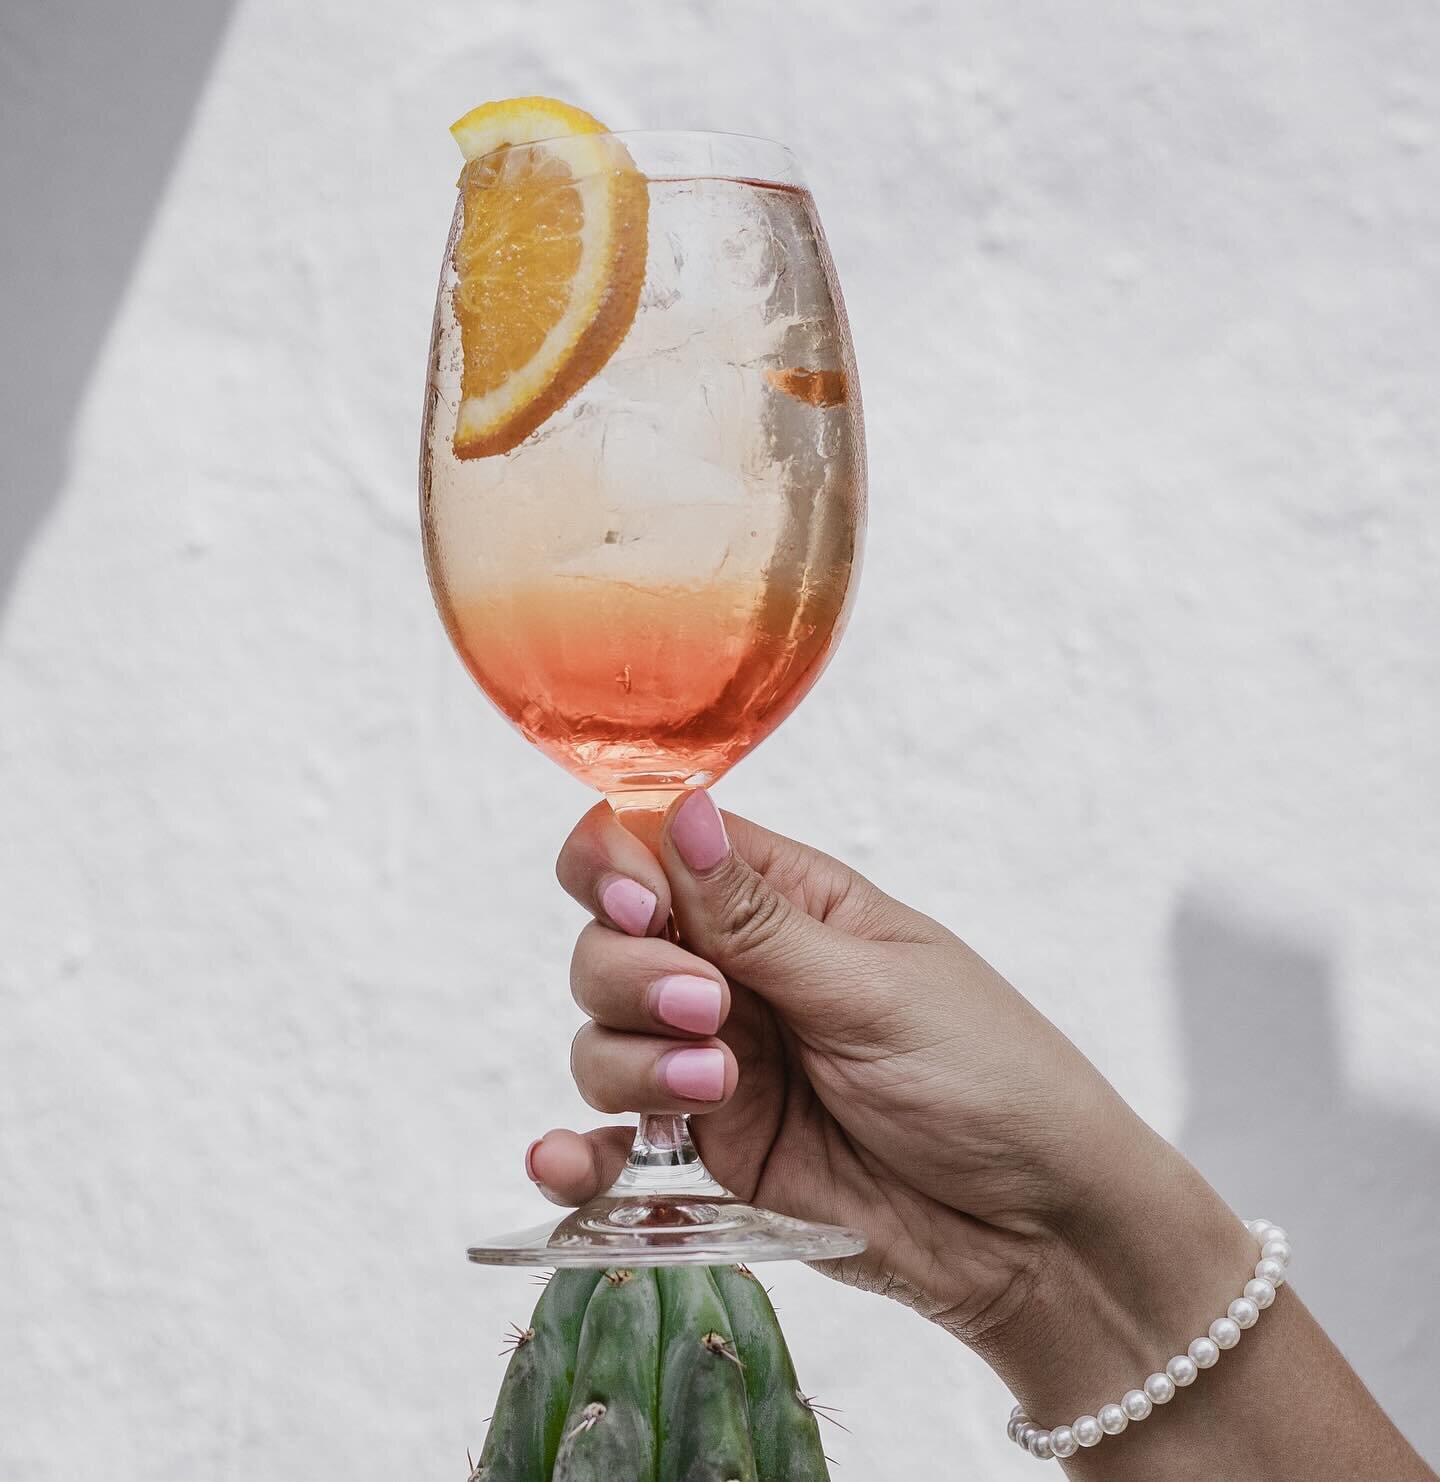 It&rsquo;s a Aperol Spritz &amp; it&rsquo;s calling your name 🍊 

We are calling it the December drink of choice! Zesty &bull; flavourful &amp; statisfying 

#milarestaurant #milarestaurants #milarestaurantatdoolhof #capetownrestaurants #capetownfoo